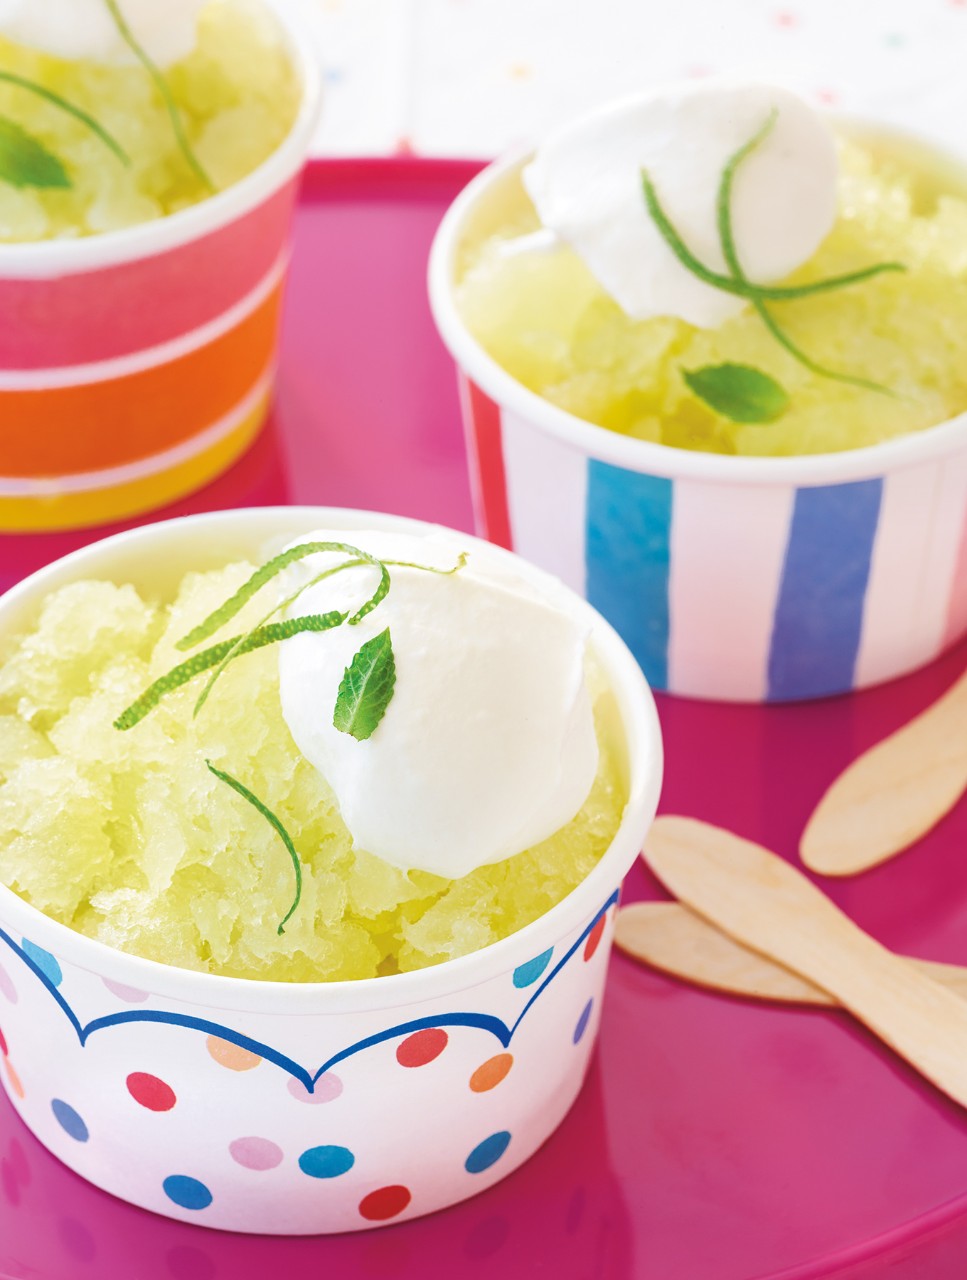 Honeydew Melon & Lime “Snow Cone” with Mint Cream